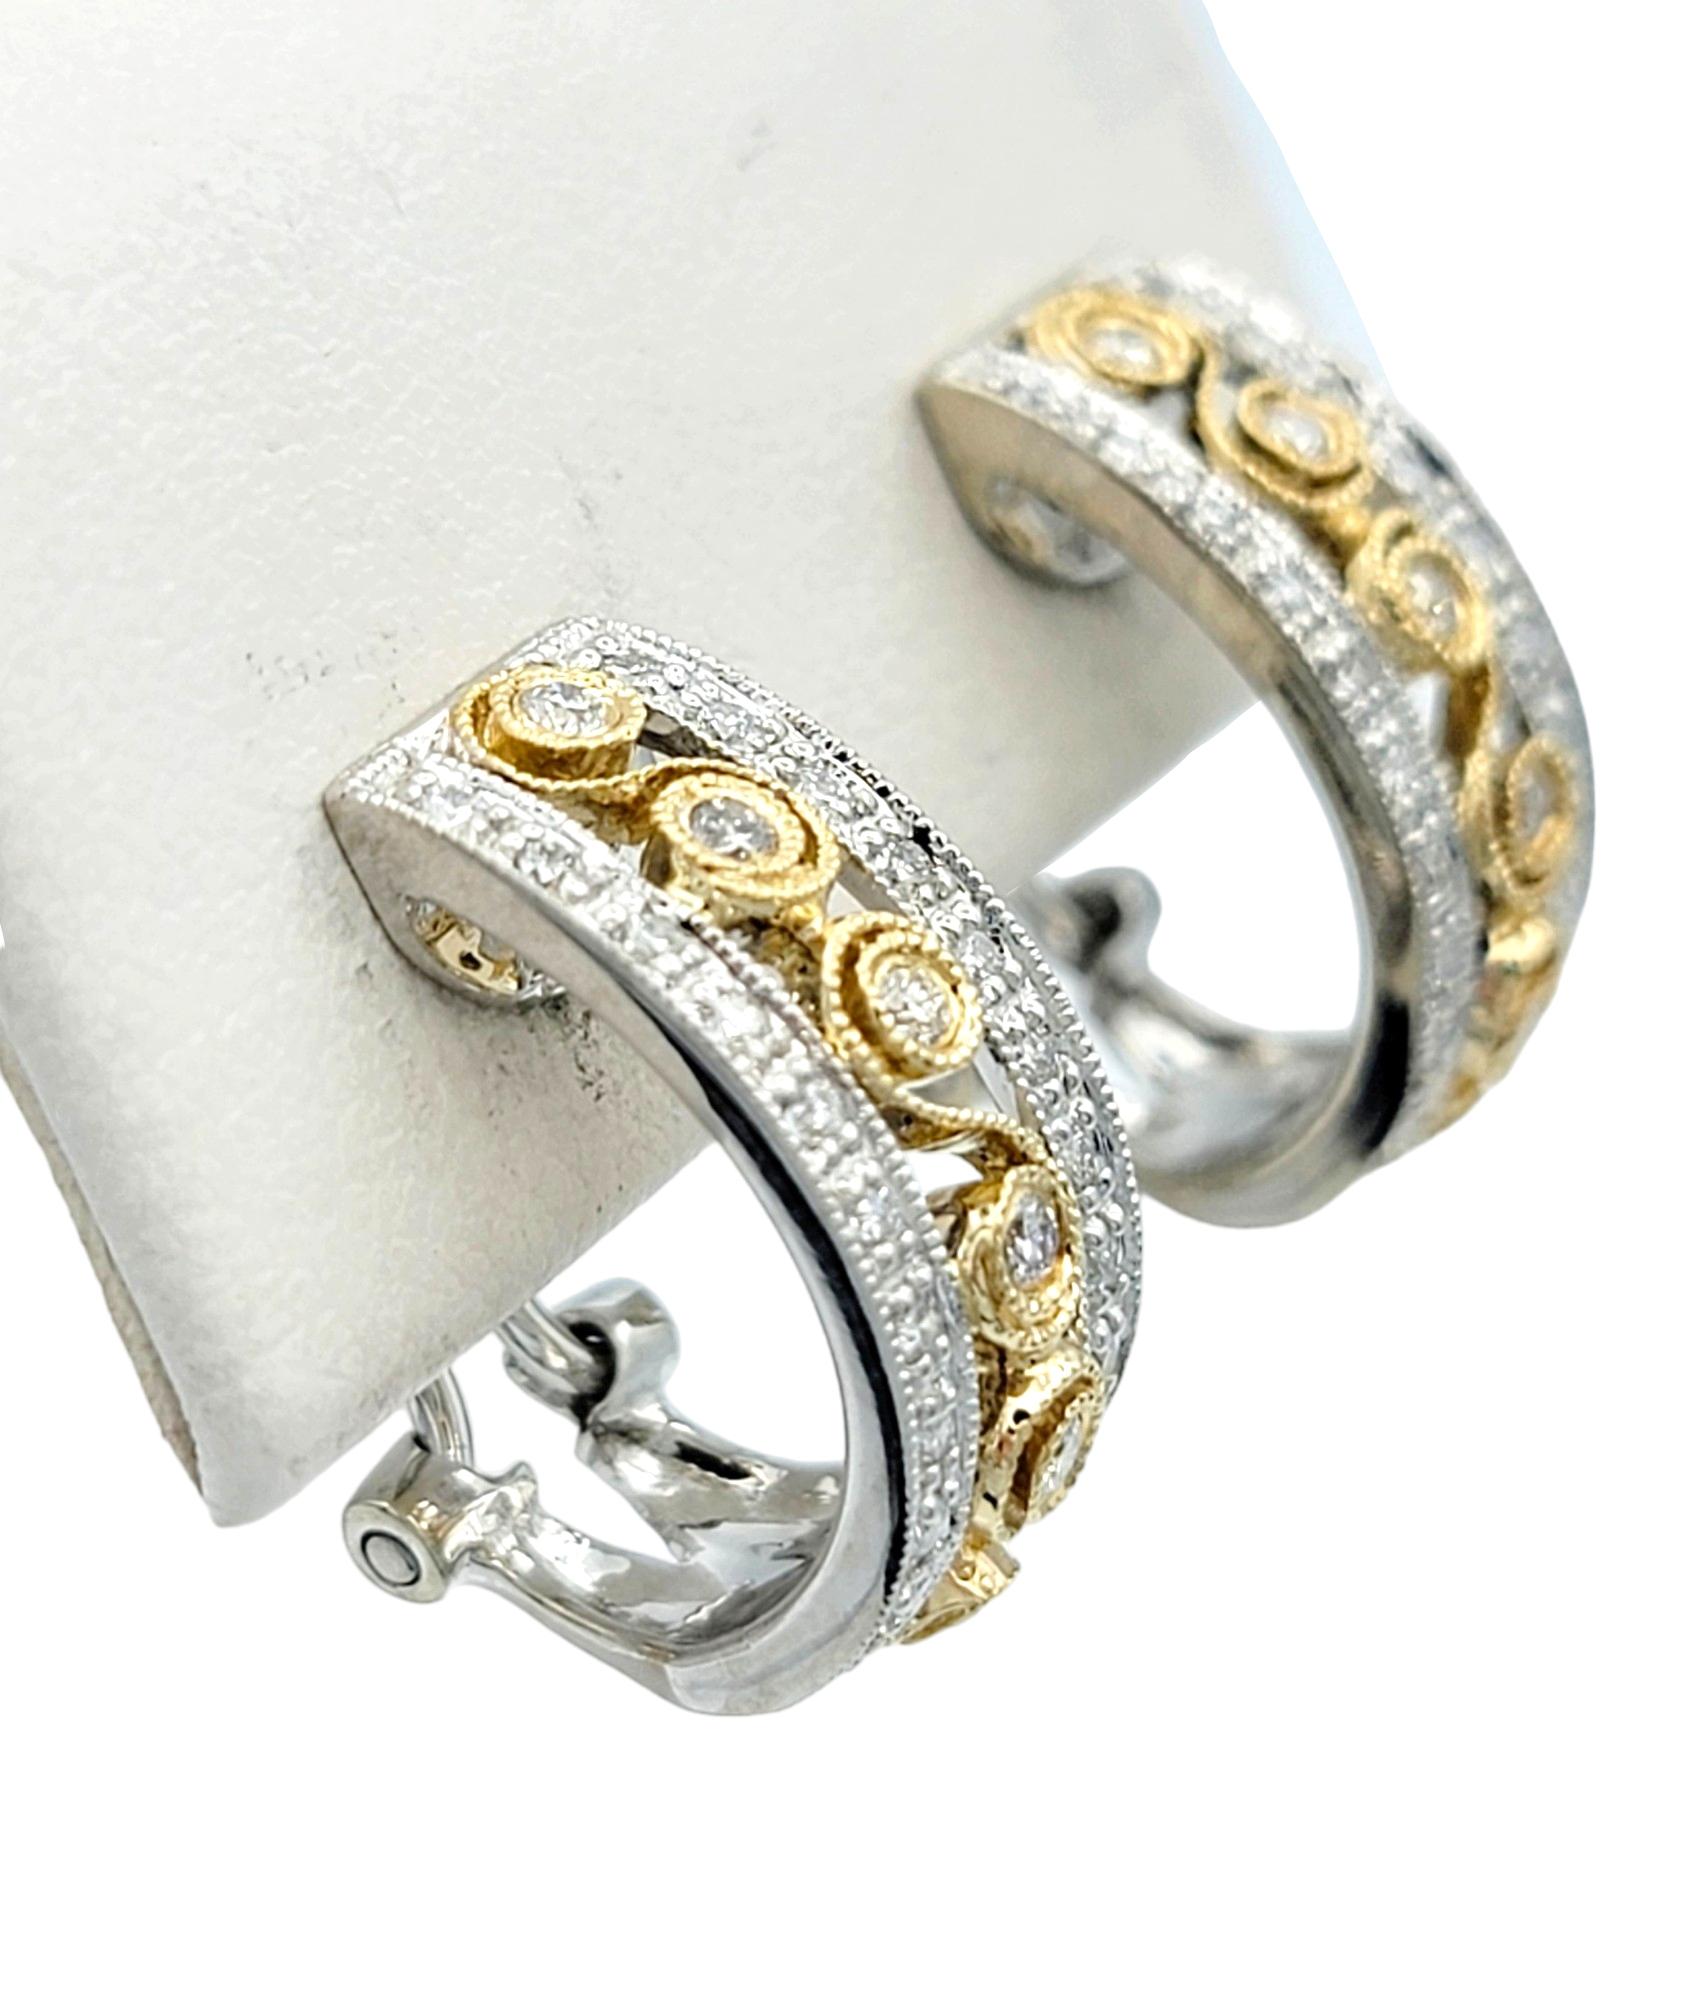 Round Cut Round Diamond Scroll Design J-Hoop Earrings in 14 Karat White and Yellow Gold For Sale